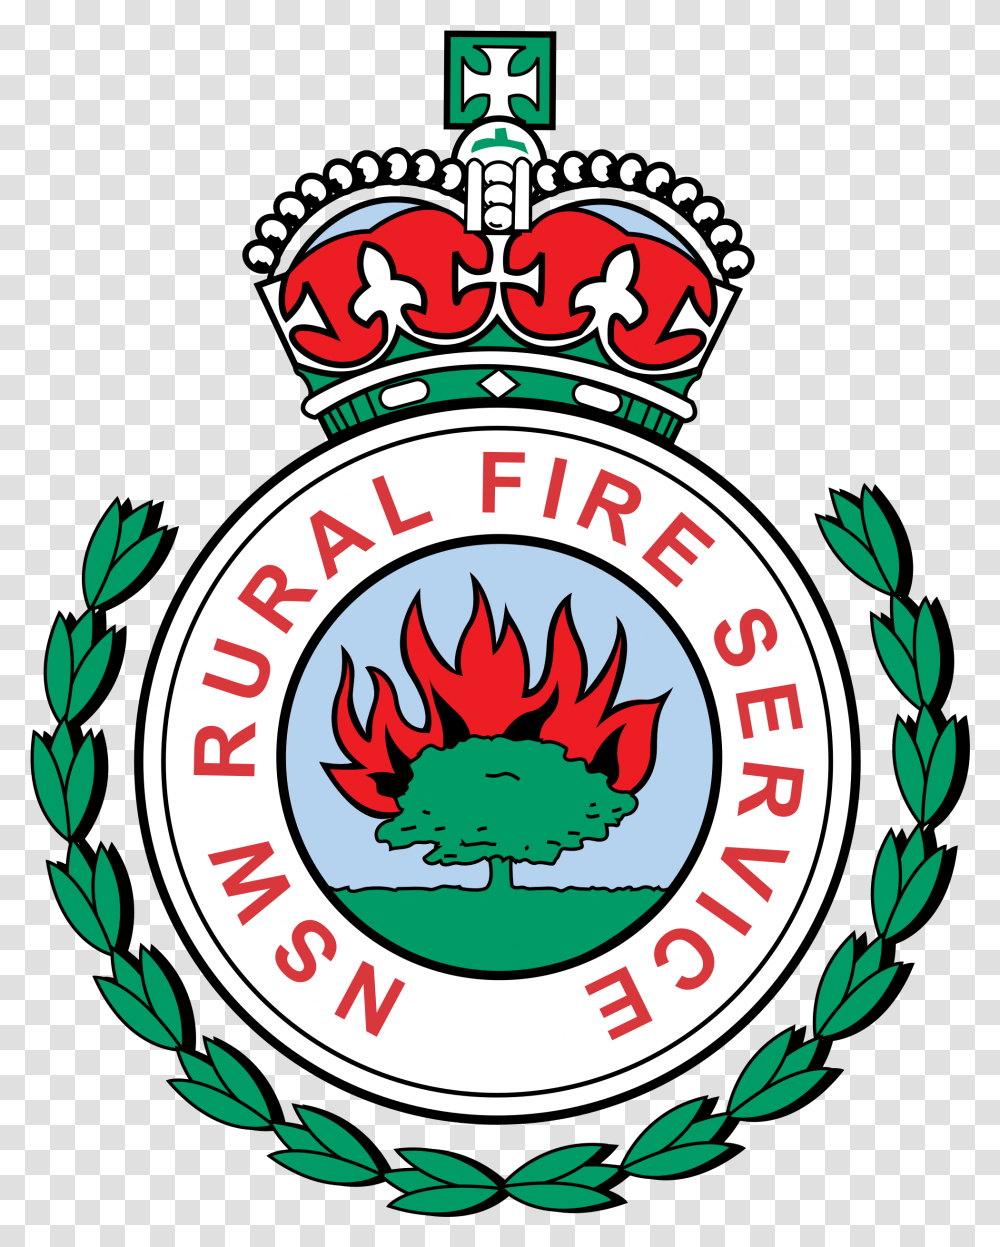 Open Nsw Rural Fire Service Logo Clipart Full Size New South Wales Rural Fire Service, Symbol, Text, Plant, Emblem Transparent Png